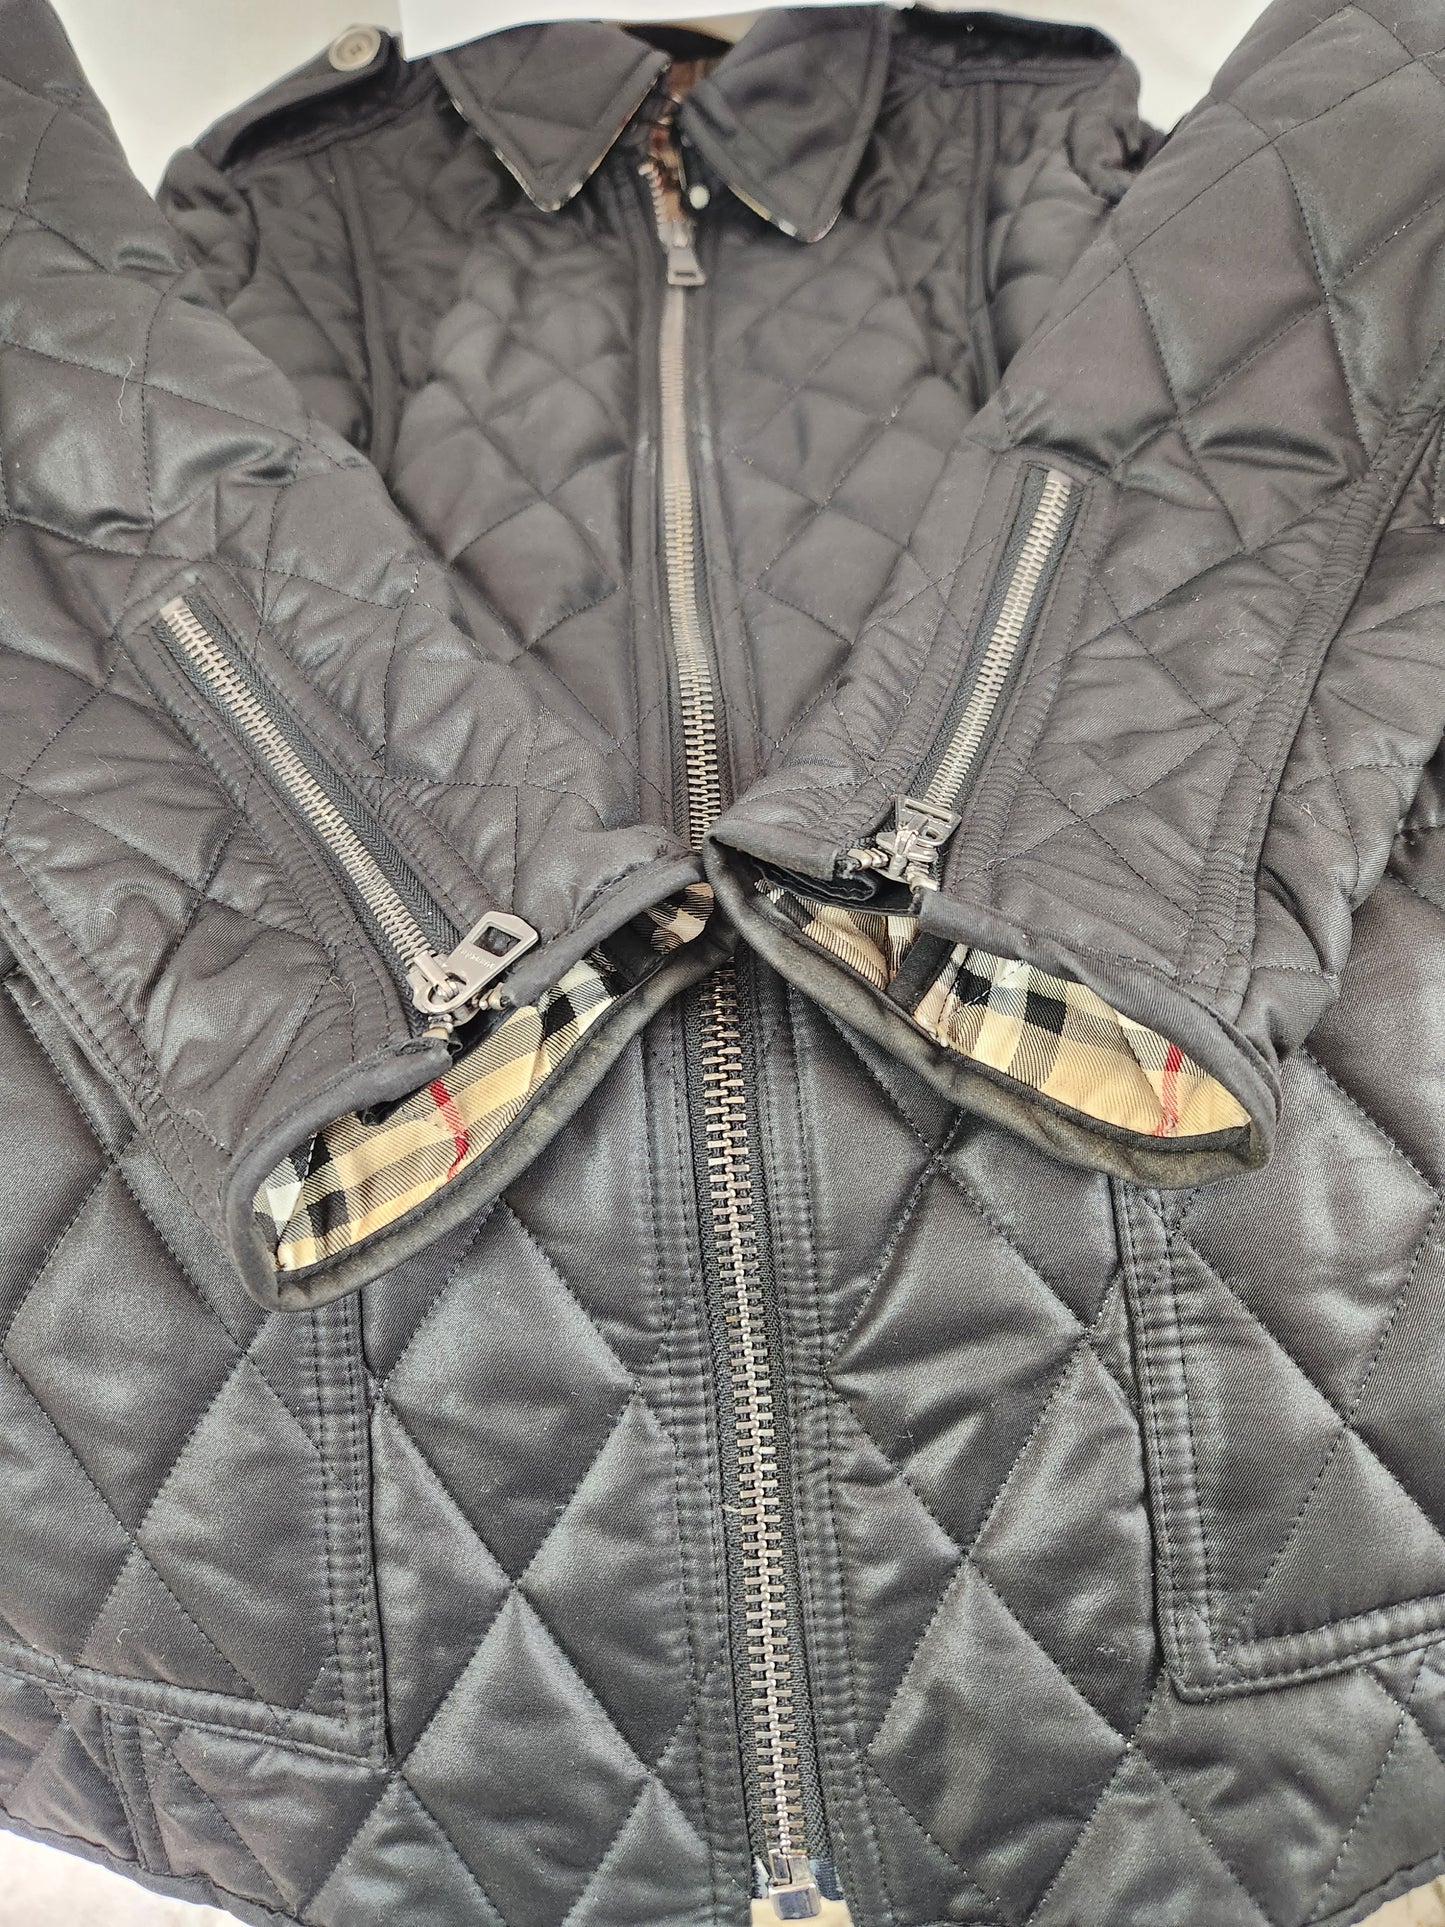 BURBERRY BRIT Black Diamond Quilted Jacket - See Measurements